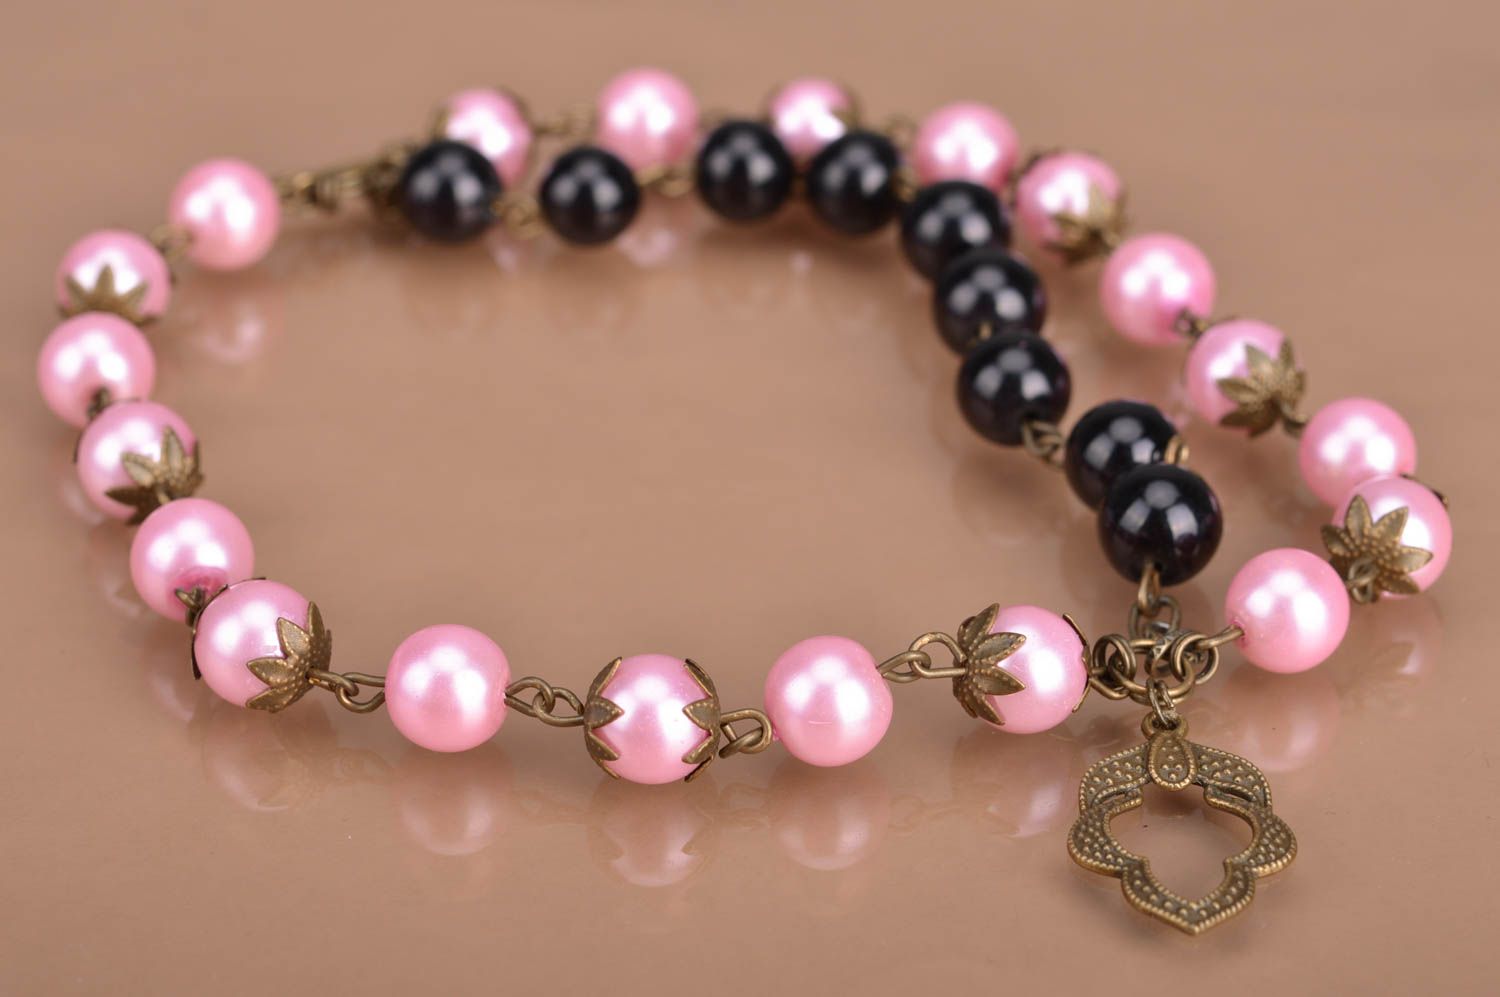 Handmade designer women's wrist bracelet with pink and black beads and charm photo 2